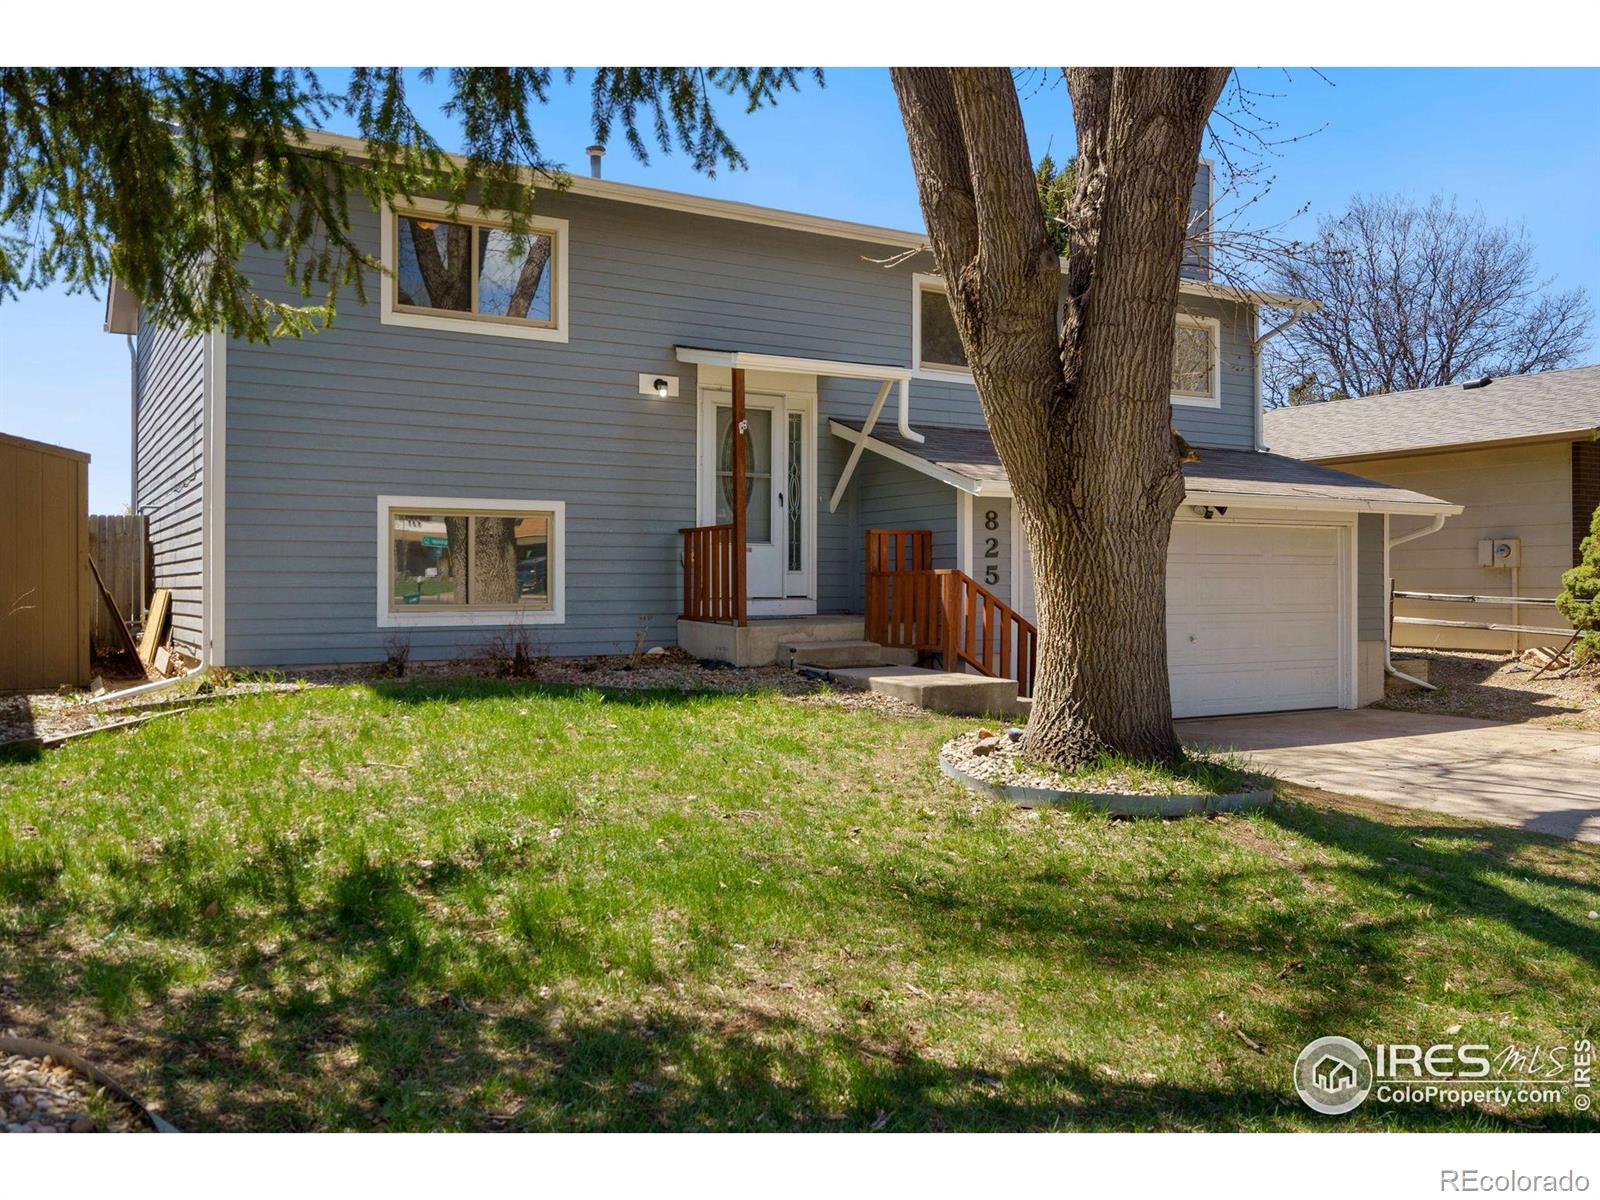 Report Image for 825  Parkview Drive,Fort Collins, Colorado